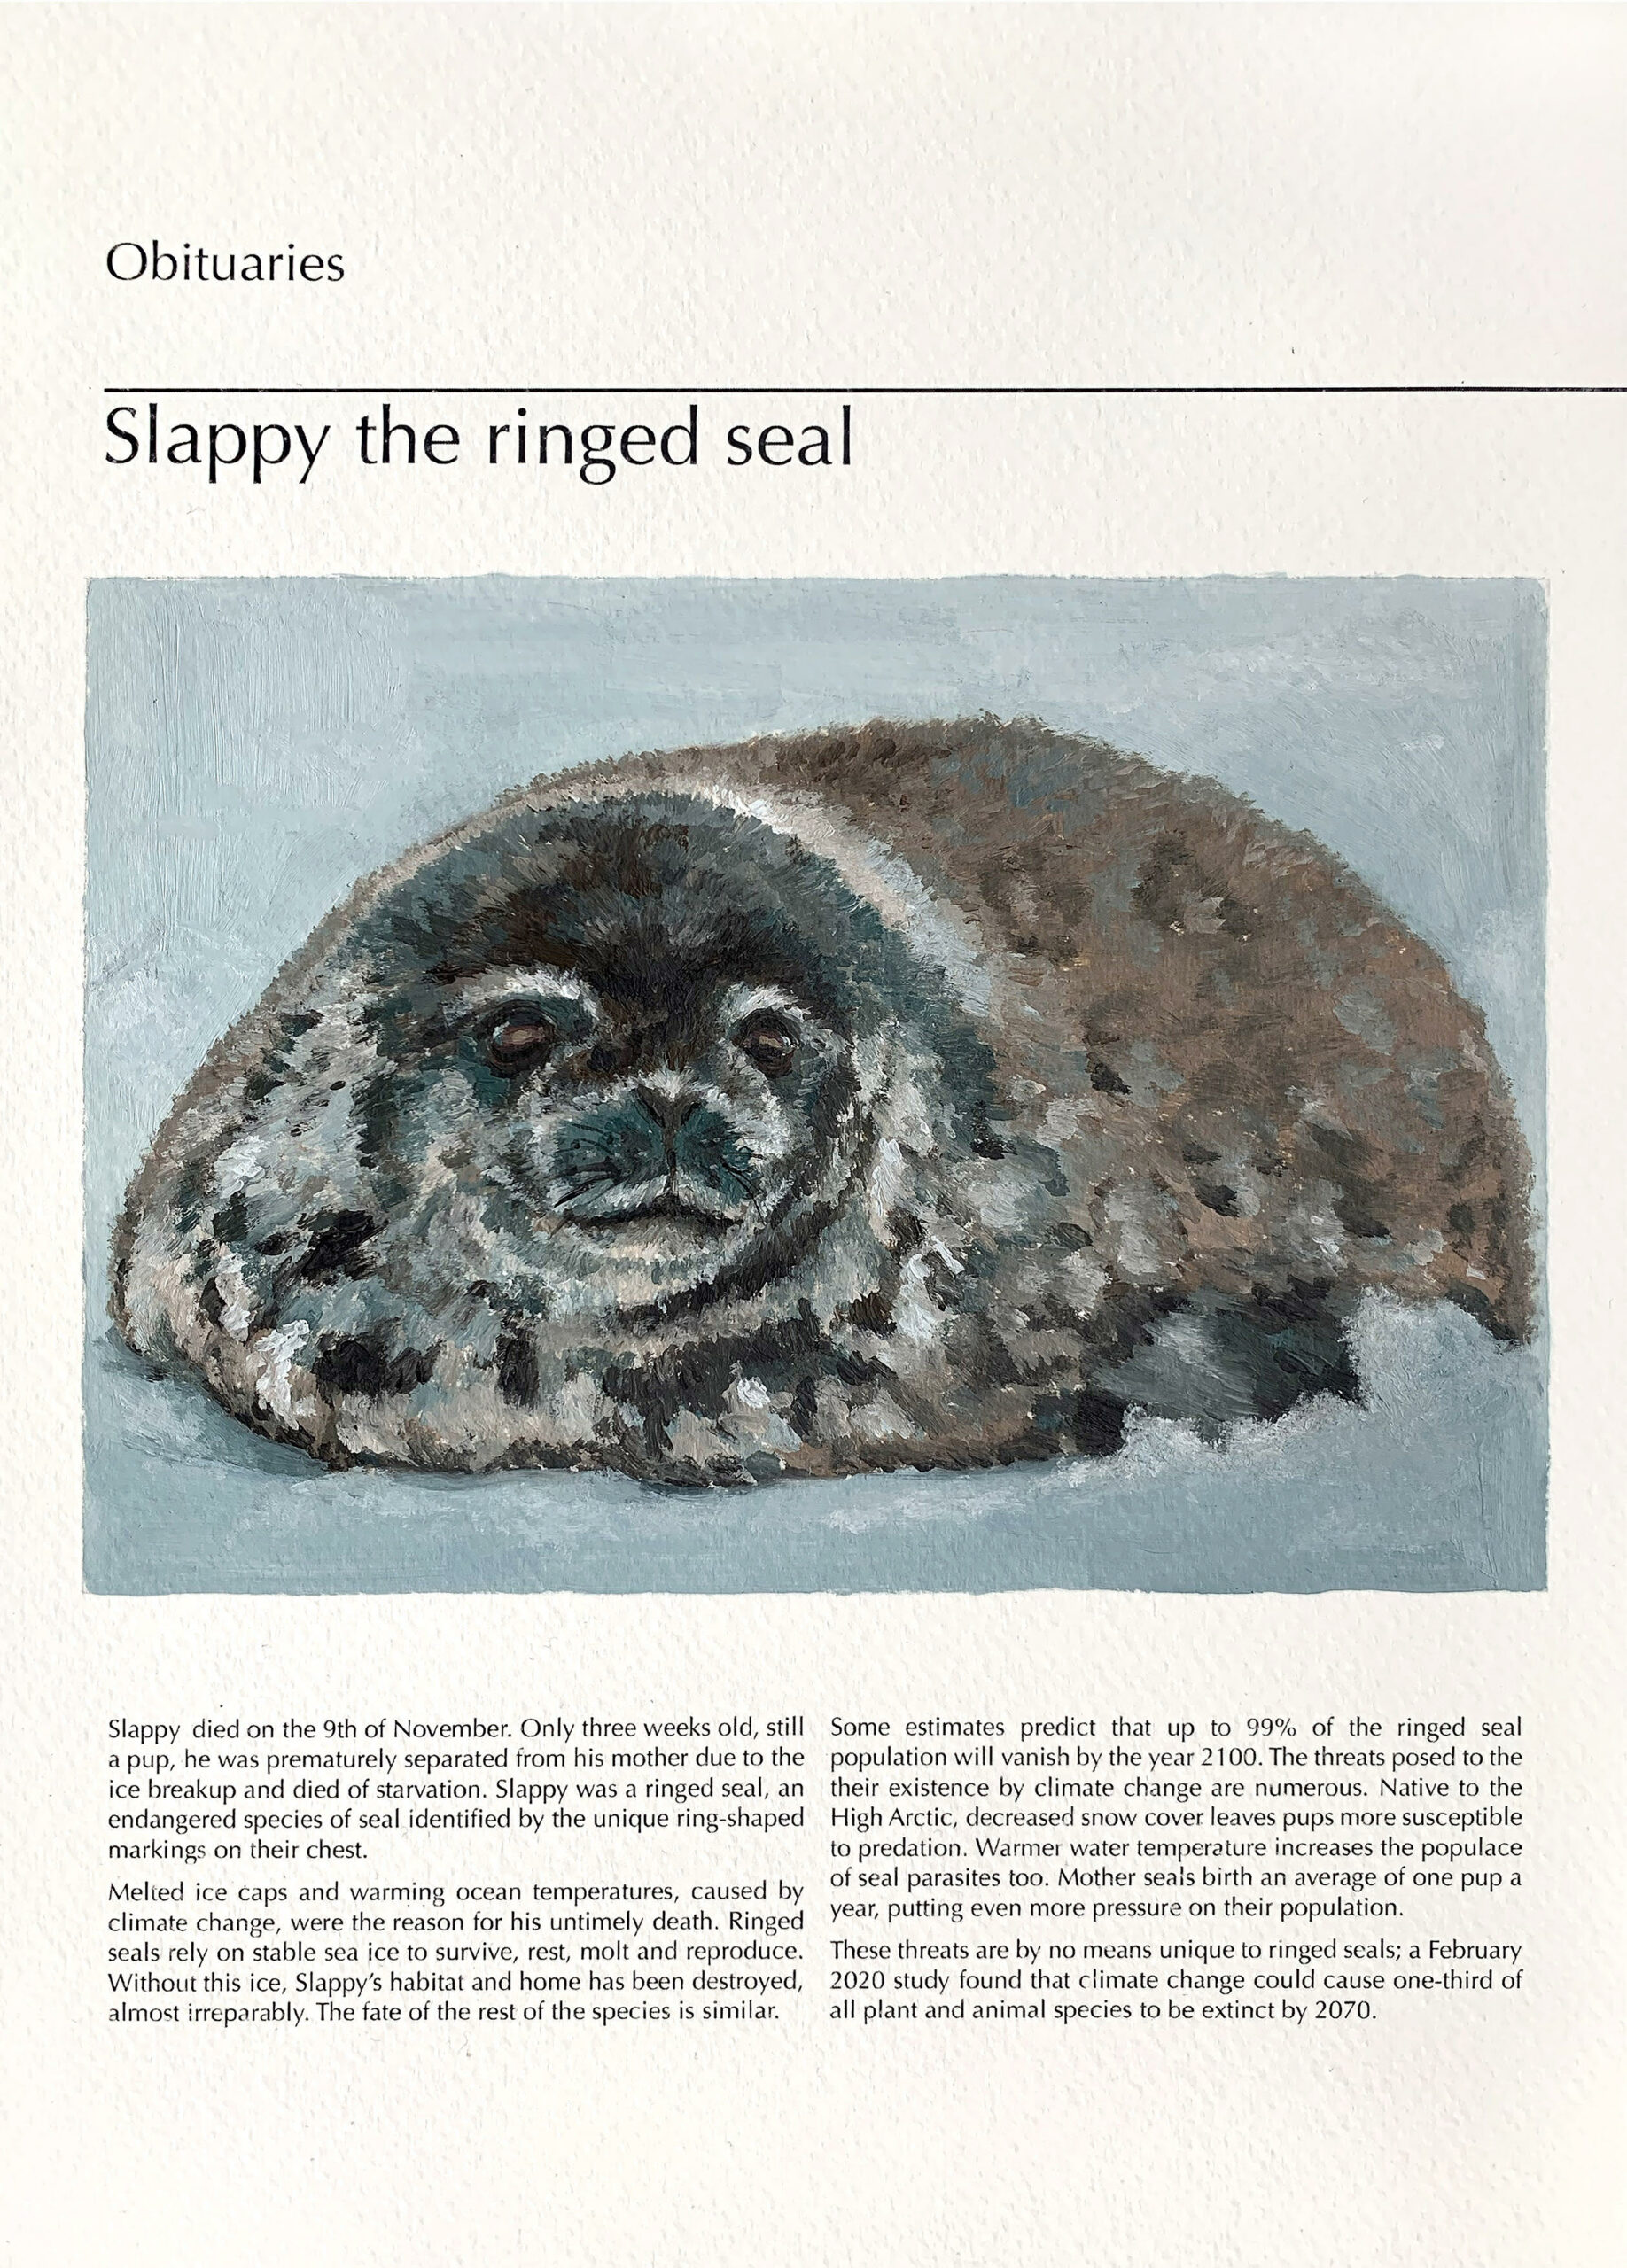 Newspaper-style obituary for a ringed seal pup called Sloppy.